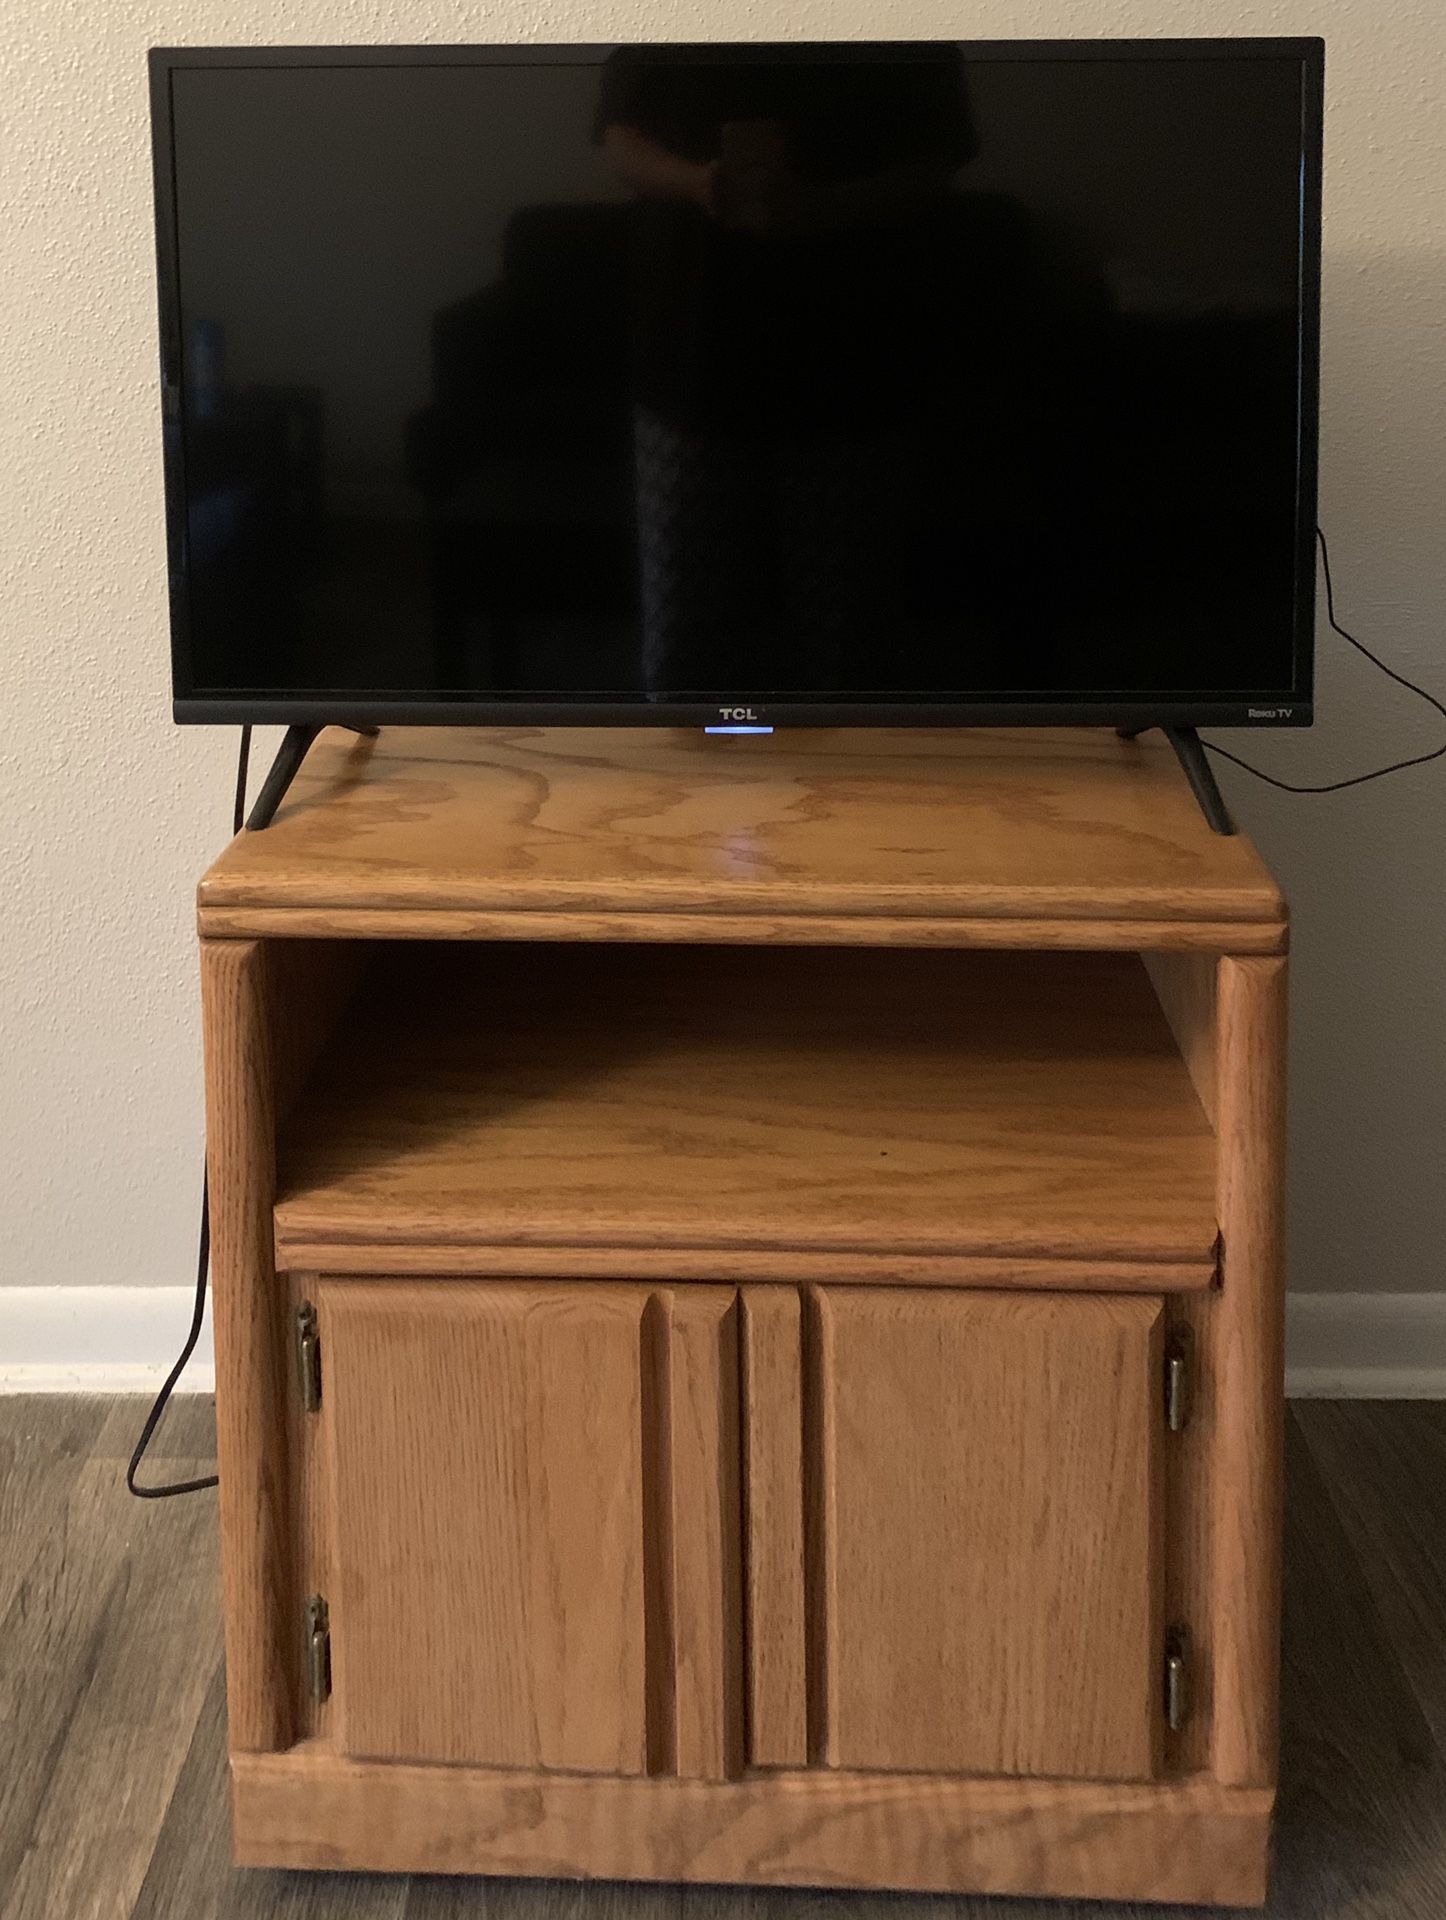 32” TCL Roku TV with Entertainment Stand